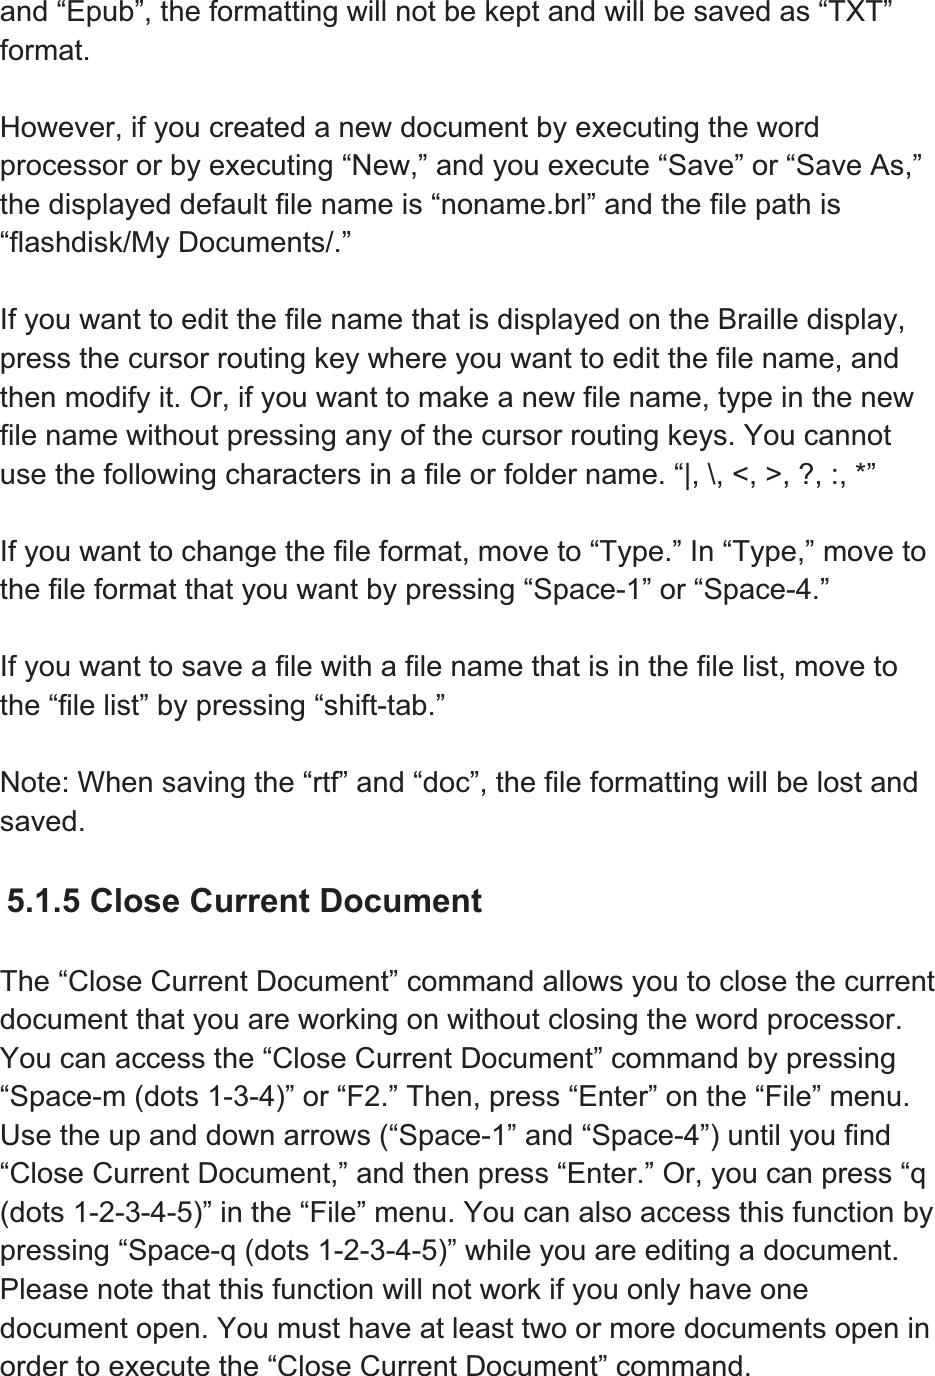 and “Epub”, the formatting will not be kept and will be saved as “TXT” format.However, if you created a new document by executing the word processor or by executing “New,” and you execute “Save” or “Save As,” the displayed default file name is “noname.brl” and the file path is “flashdisk/My Documents/.” If you want to edit the file name that is displayed on the Braille display, press the cursor routing key where you want to edit the file name, and then modify it. Or, if you want to make a new file name, type in the new file name without pressing any of the cursor routing keys. You cannot use the following characters in a file or folder name. “|, \, &lt;, &gt;, ?, :, *” If you want to change the file format, move to “Type.” In “Type,” move to the file format that you want by pressing “Space-1” or “Space-4.” If you want to save a file with a file name that is in the file list, move to the “file list” by pressing “shift-tab.”   Note: When saving the “rtf” and “doc”, the file formatting will be lost and saved.  5.1.5 Close Current Document The “Close Current Document” command allows you to close the current document that you are working on without closing the word processor. You can access the “Close Current Document” command by pressing “Space-m (dots 1-3-4)” or “F2.” Then, press “Enter” on the “File” menu. Use the up and down arrows (“Space-1” and “Space-4”) until you find “Close Current Document,” and then press “Enter.” Or, you can press “q (dots 1-2-3-4-5)” in the “File” menu. You can also access this function by pressing “Space-q (dots 1-2-3-4-5)” while you are editing a document. Please note that this function will not work if you only have one document open. You must have at least two or more documents open in order to execute the “Close Current Document” command. 